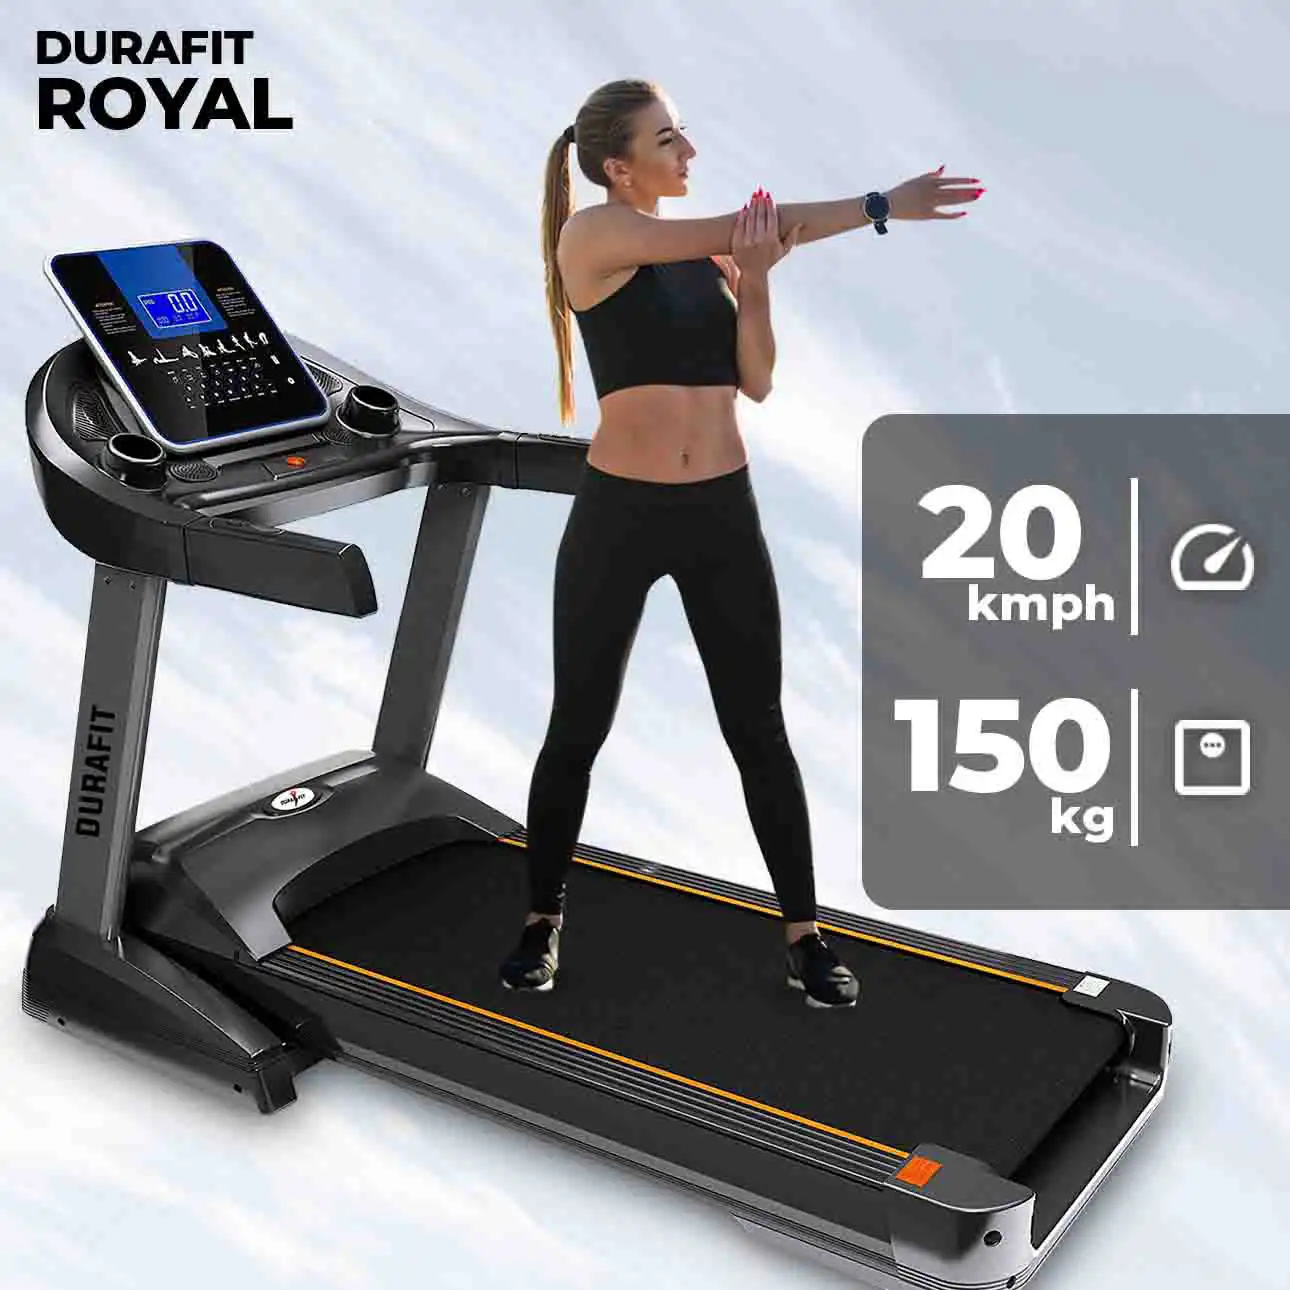 Durafit Royal Treadmill with Max 150kg User Weight